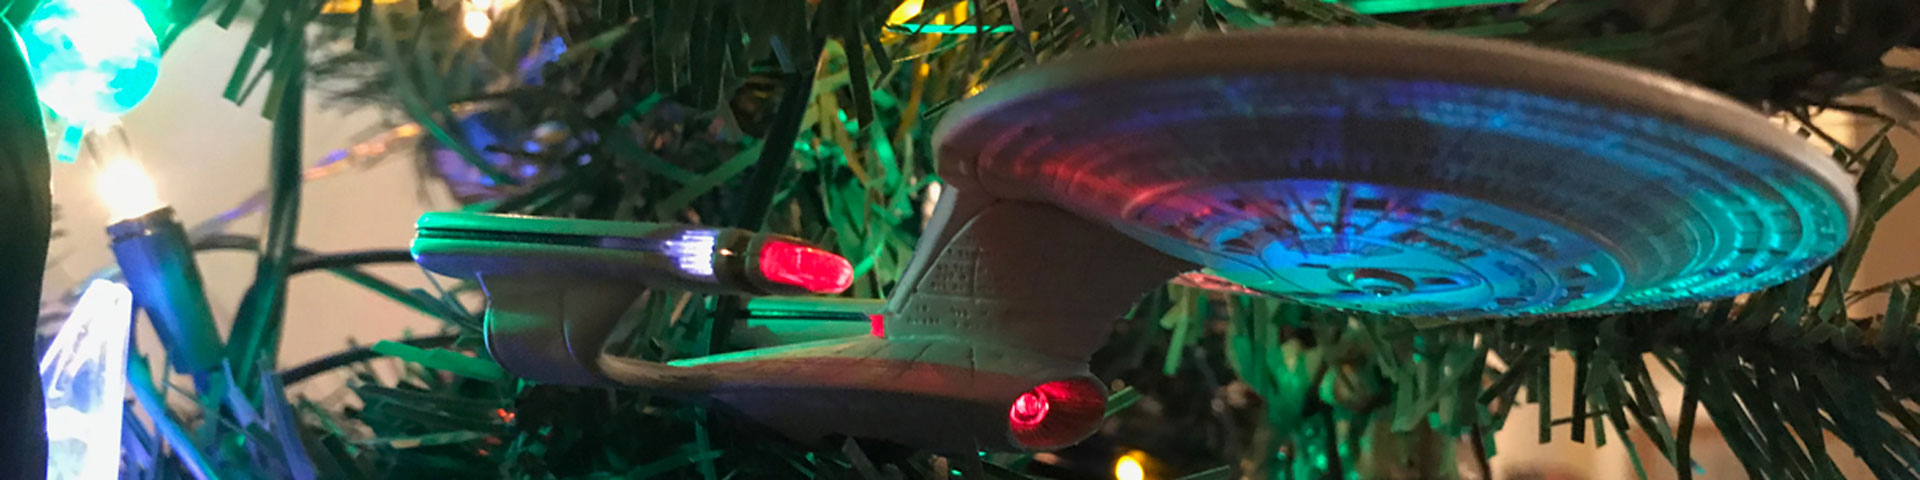 A side-view of the starship Enterprise 1701-D